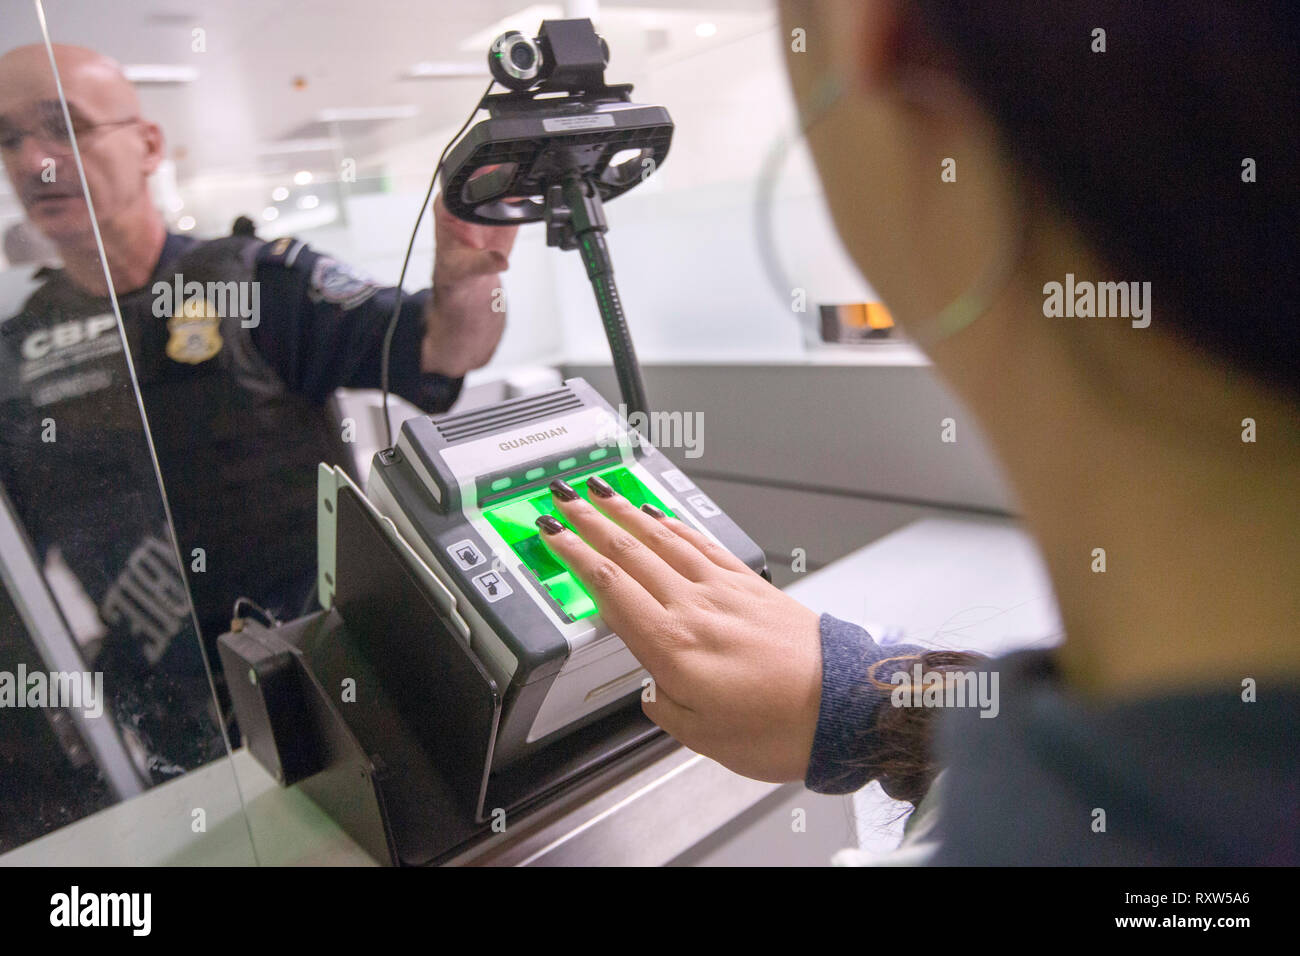 United States Customs and Border Protection (USCBP) scan the finger prints of arrivals at Miami International Airport in Miami, Florida. See more information below.; Stock Photo